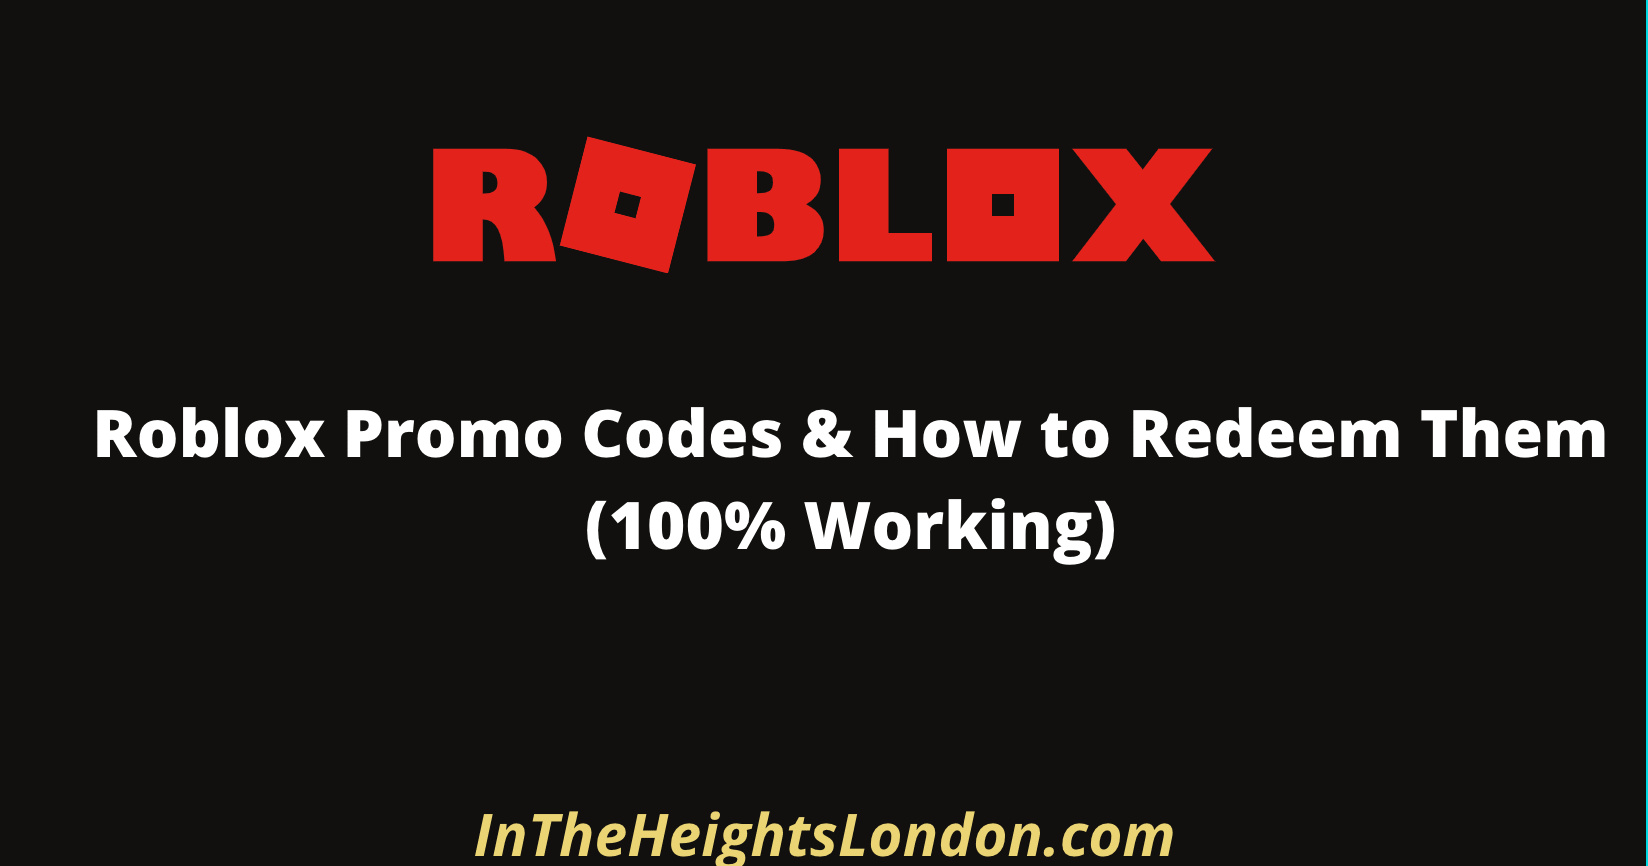 Roblox Promo Codes How To Redeem April 2021 - honest code roblox